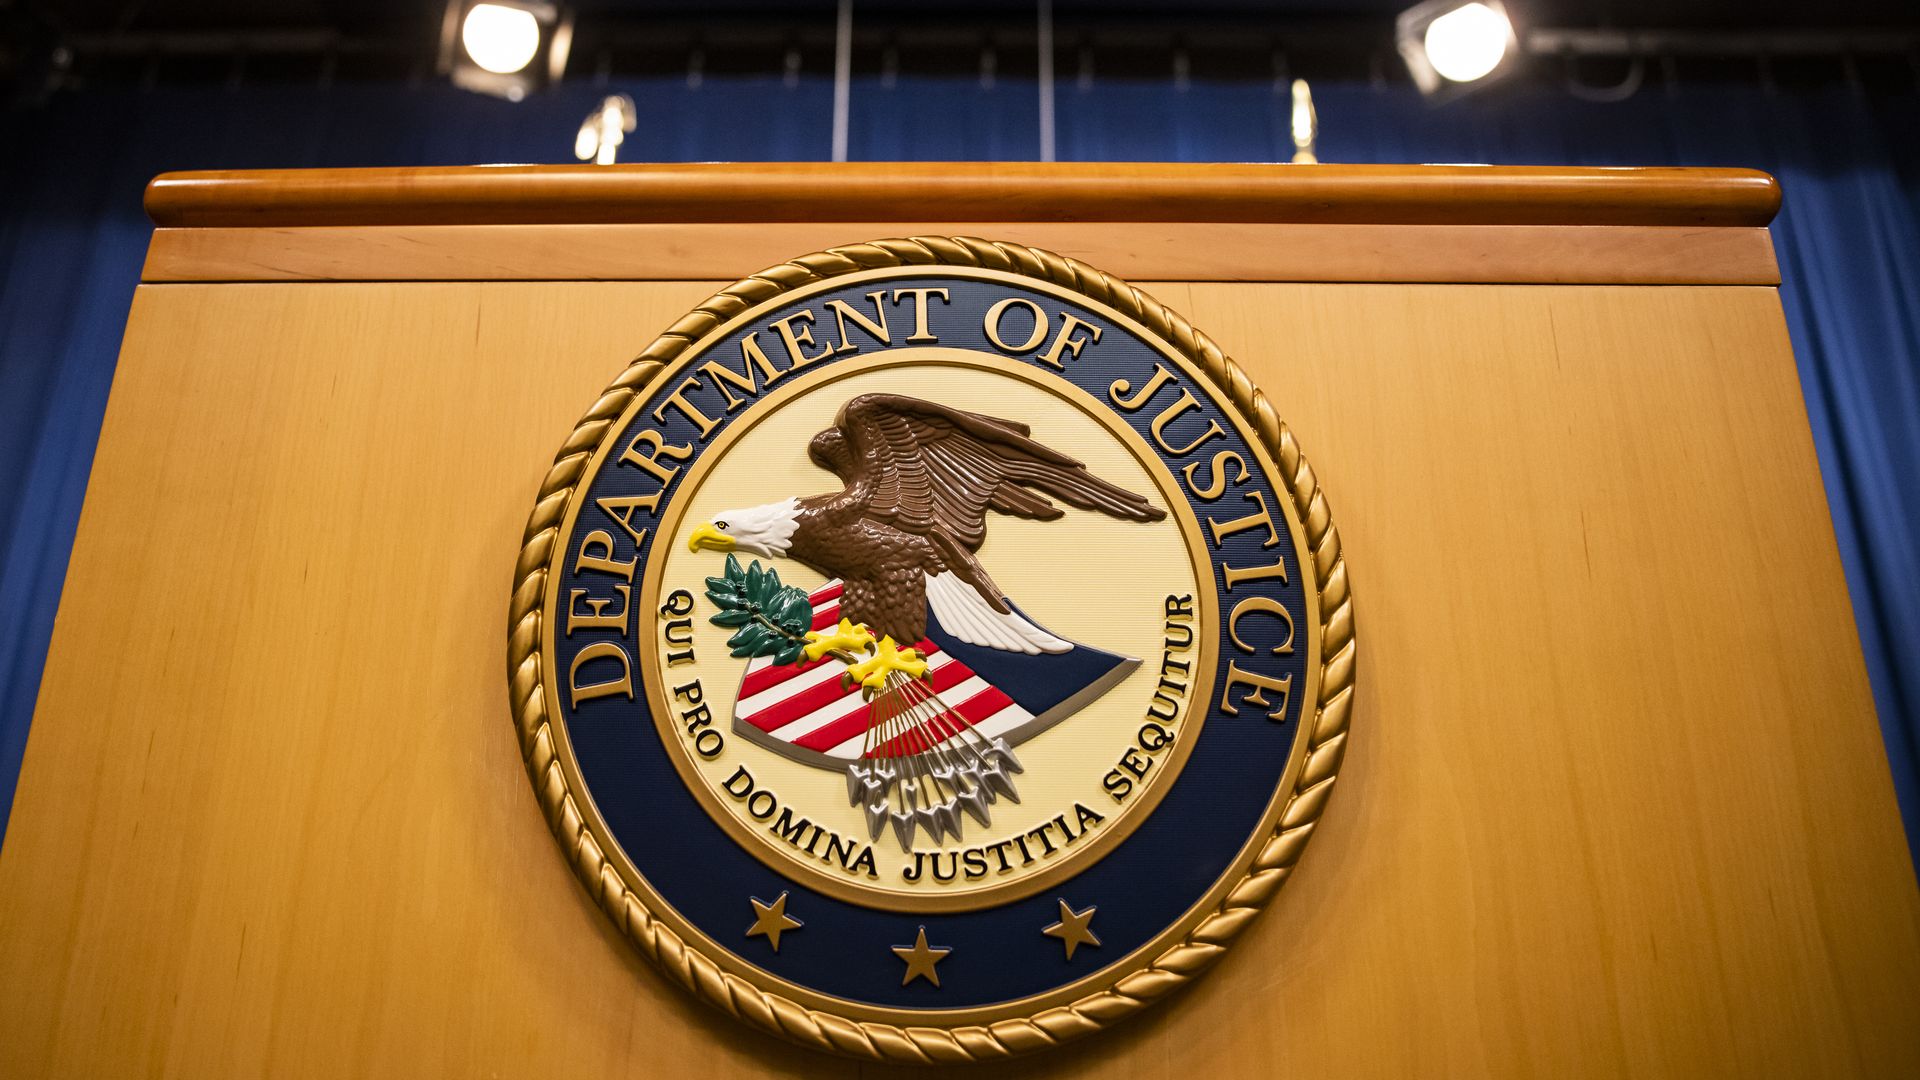 The U.S. Department of Justice seal on a podium in Washington, D.C., U.S., on Thursday, Aug. 5, 2021. 